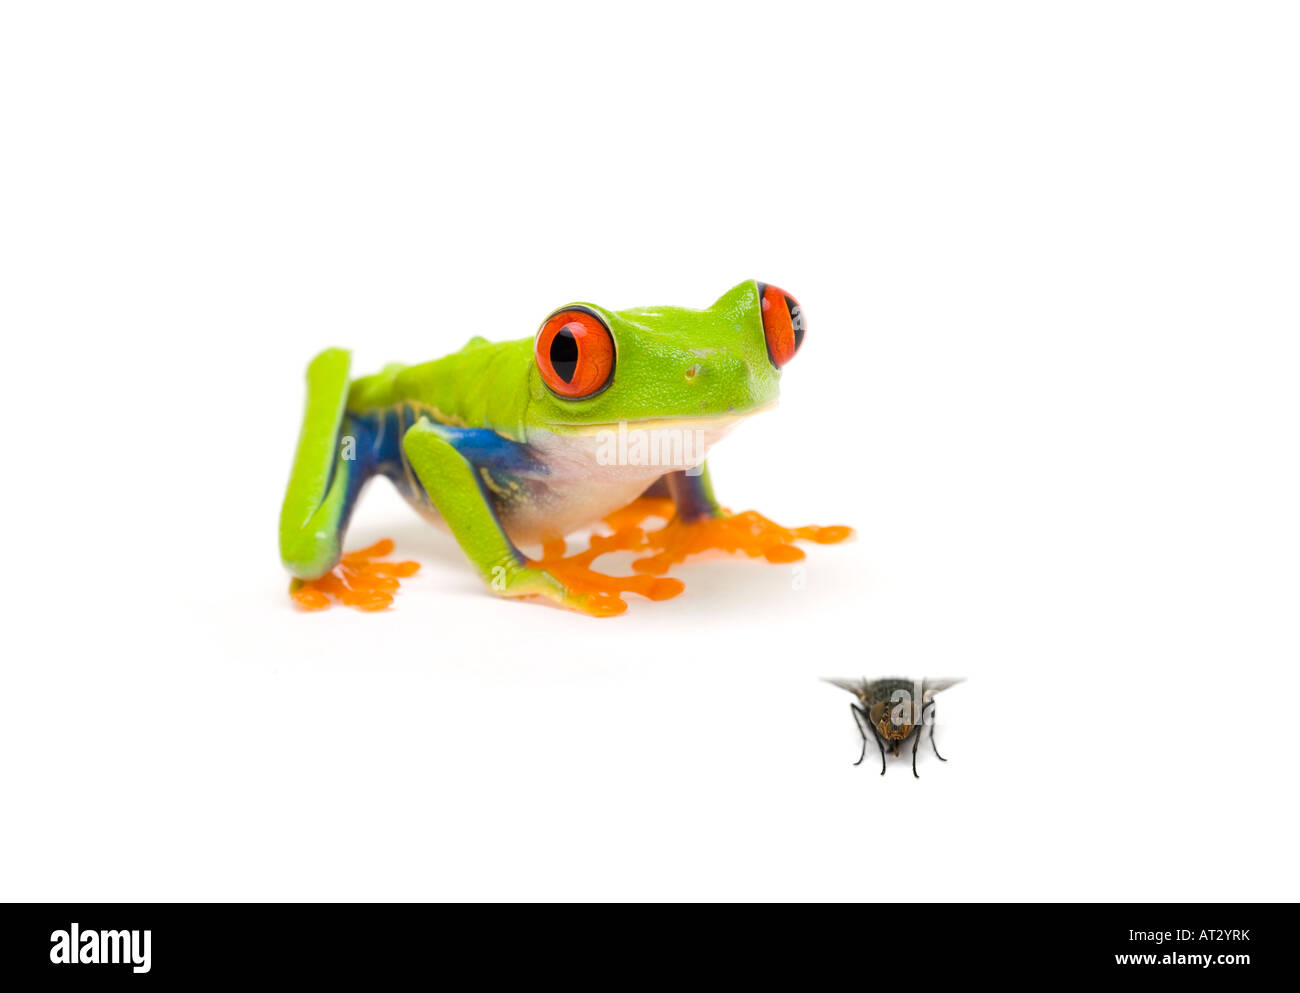 Frog catching fly Stock Photo